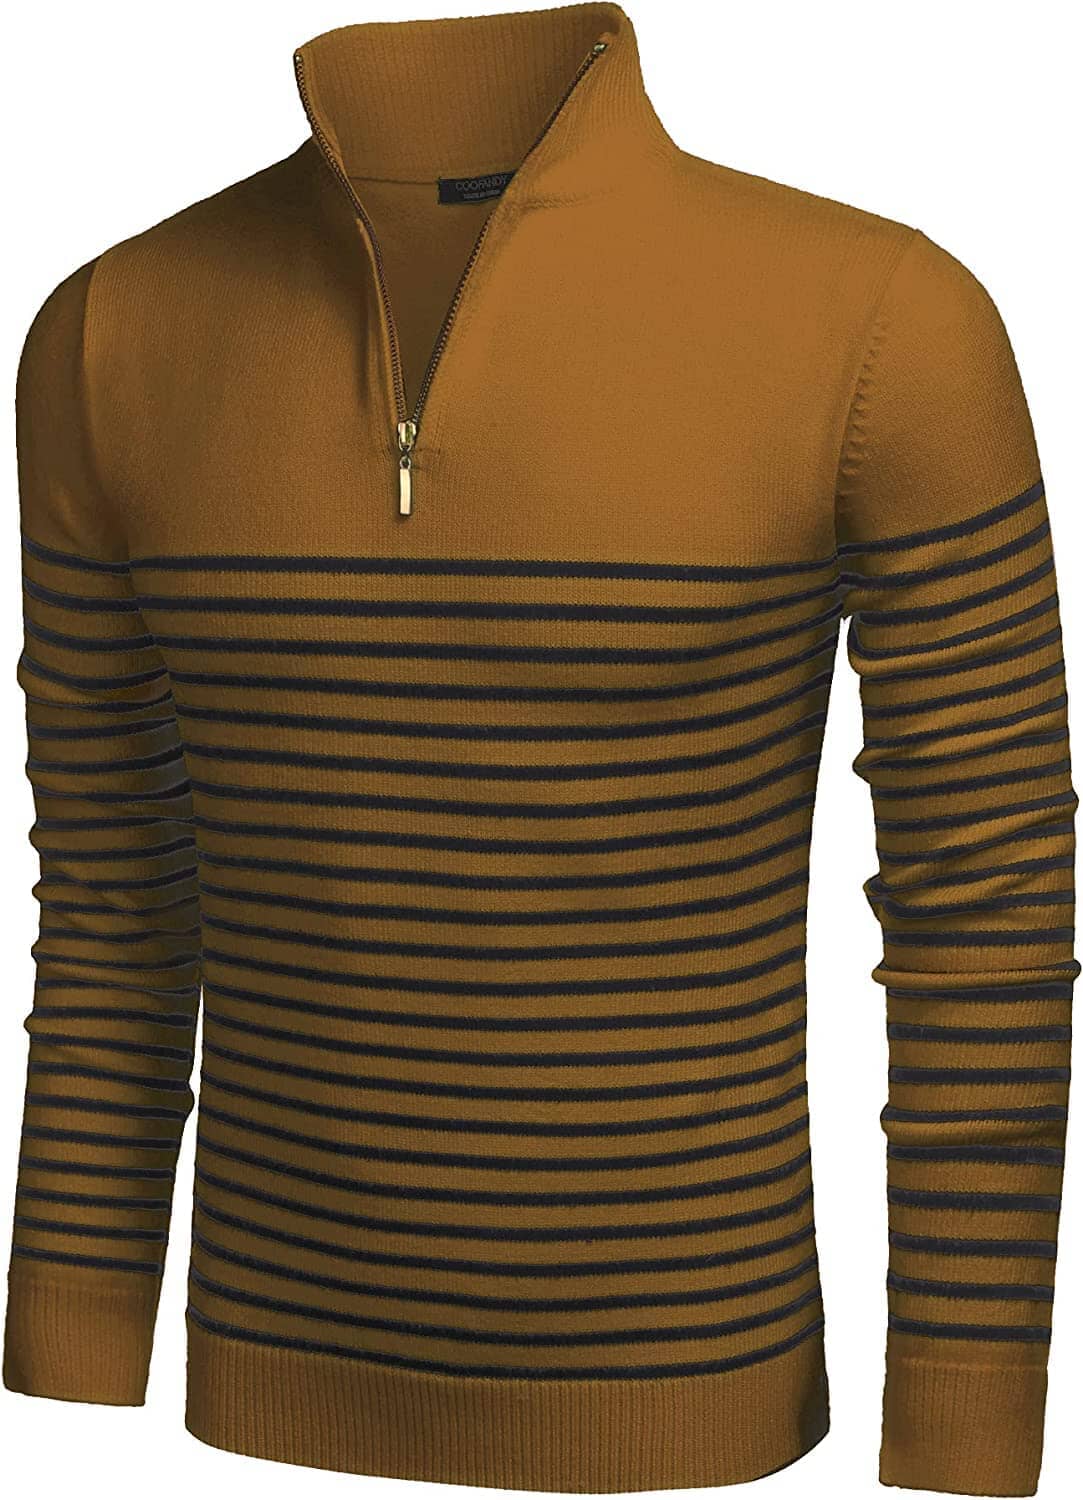 Coofandy Striped Zip Up Mock Neck Pullover Sweaters (US Only) Fashion Hoodies & Sweatshirts Simbama Golden Yellow S 